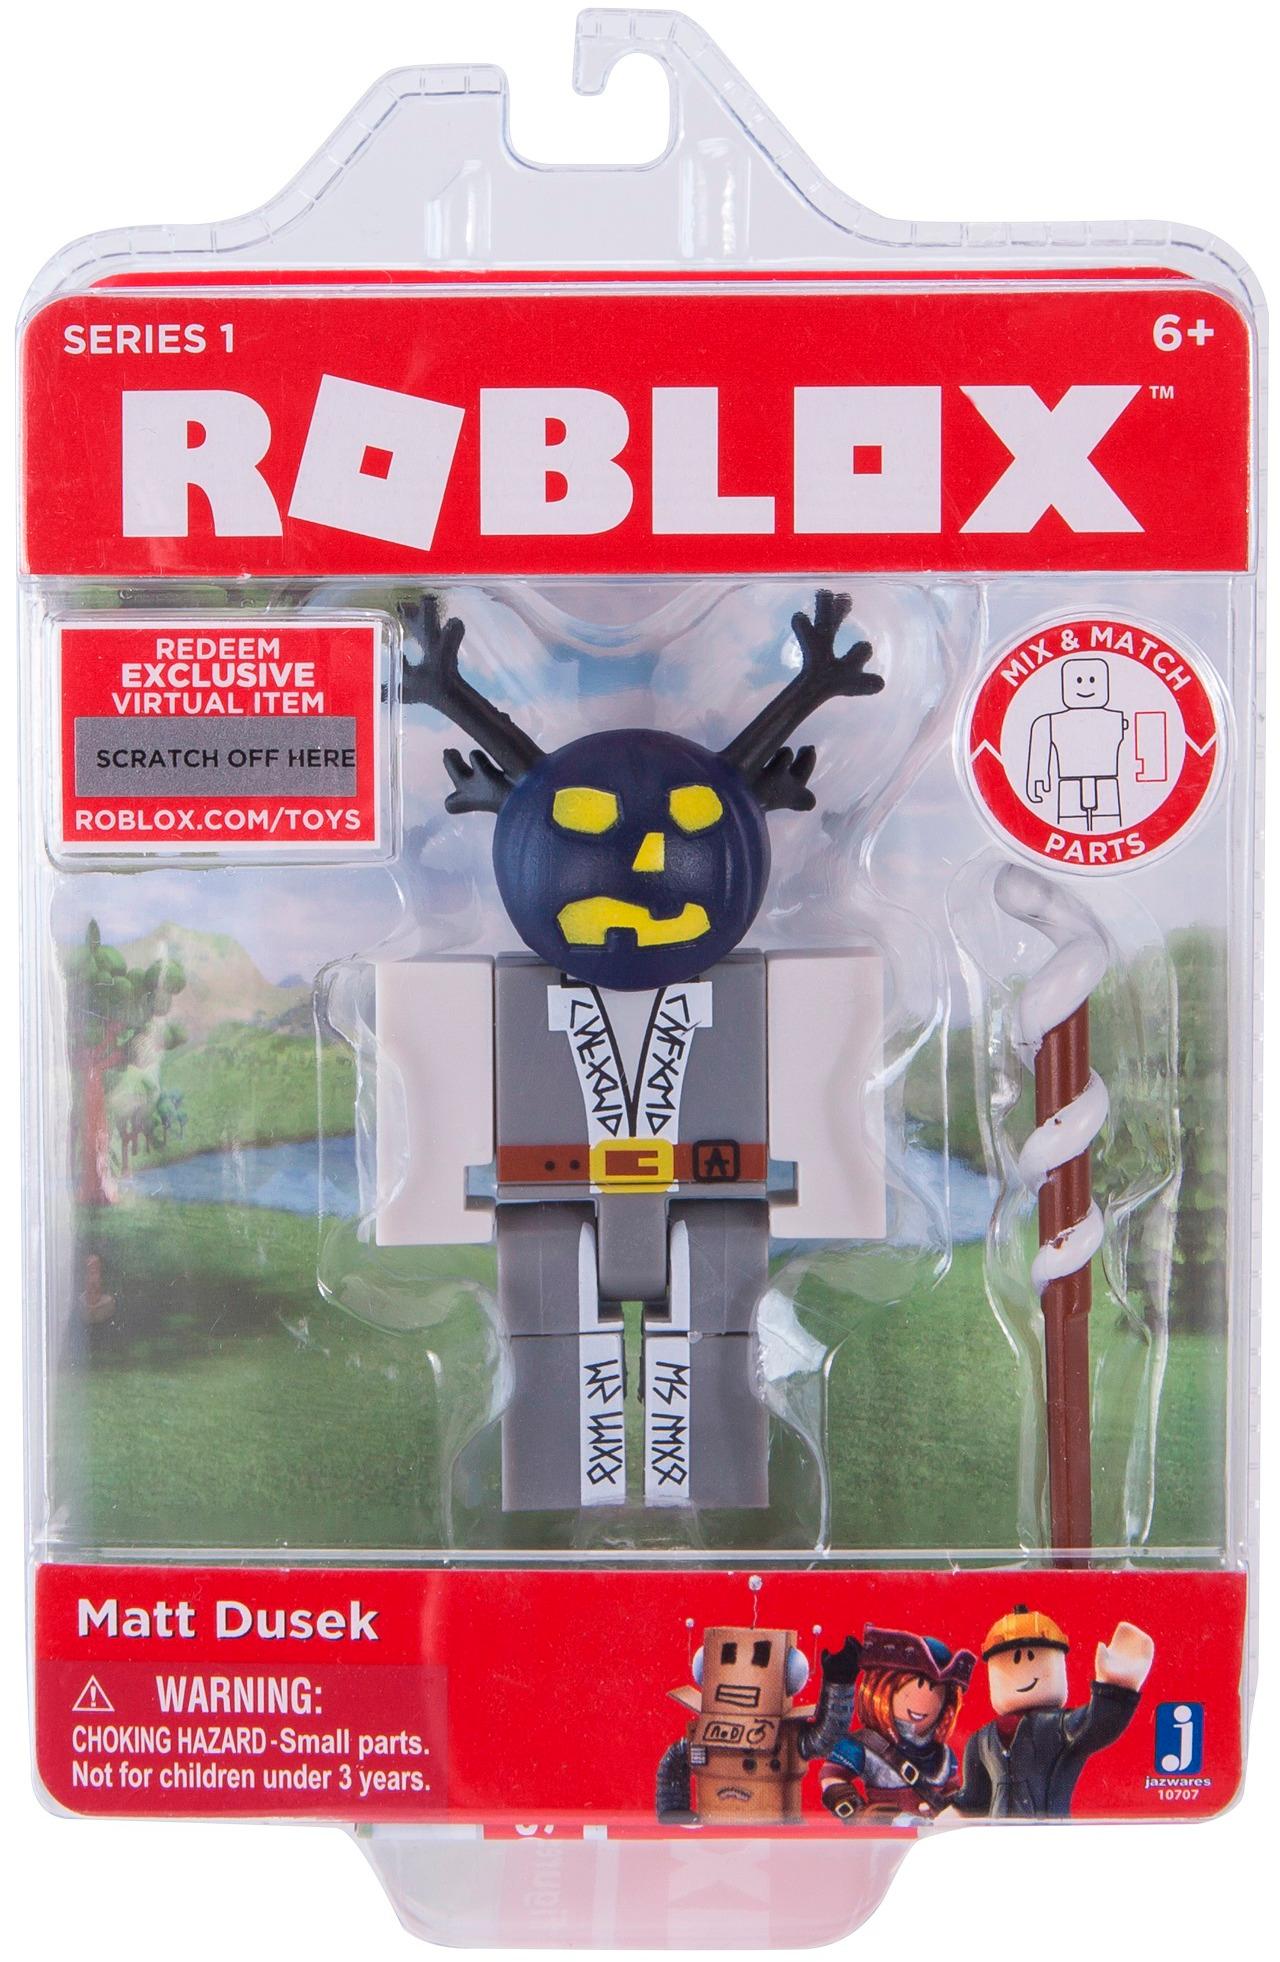 Best Buy Roblox Core Figure Styles May Vary 10705 - redeem exclusive virtual item scratch off hire robloxcomtoys